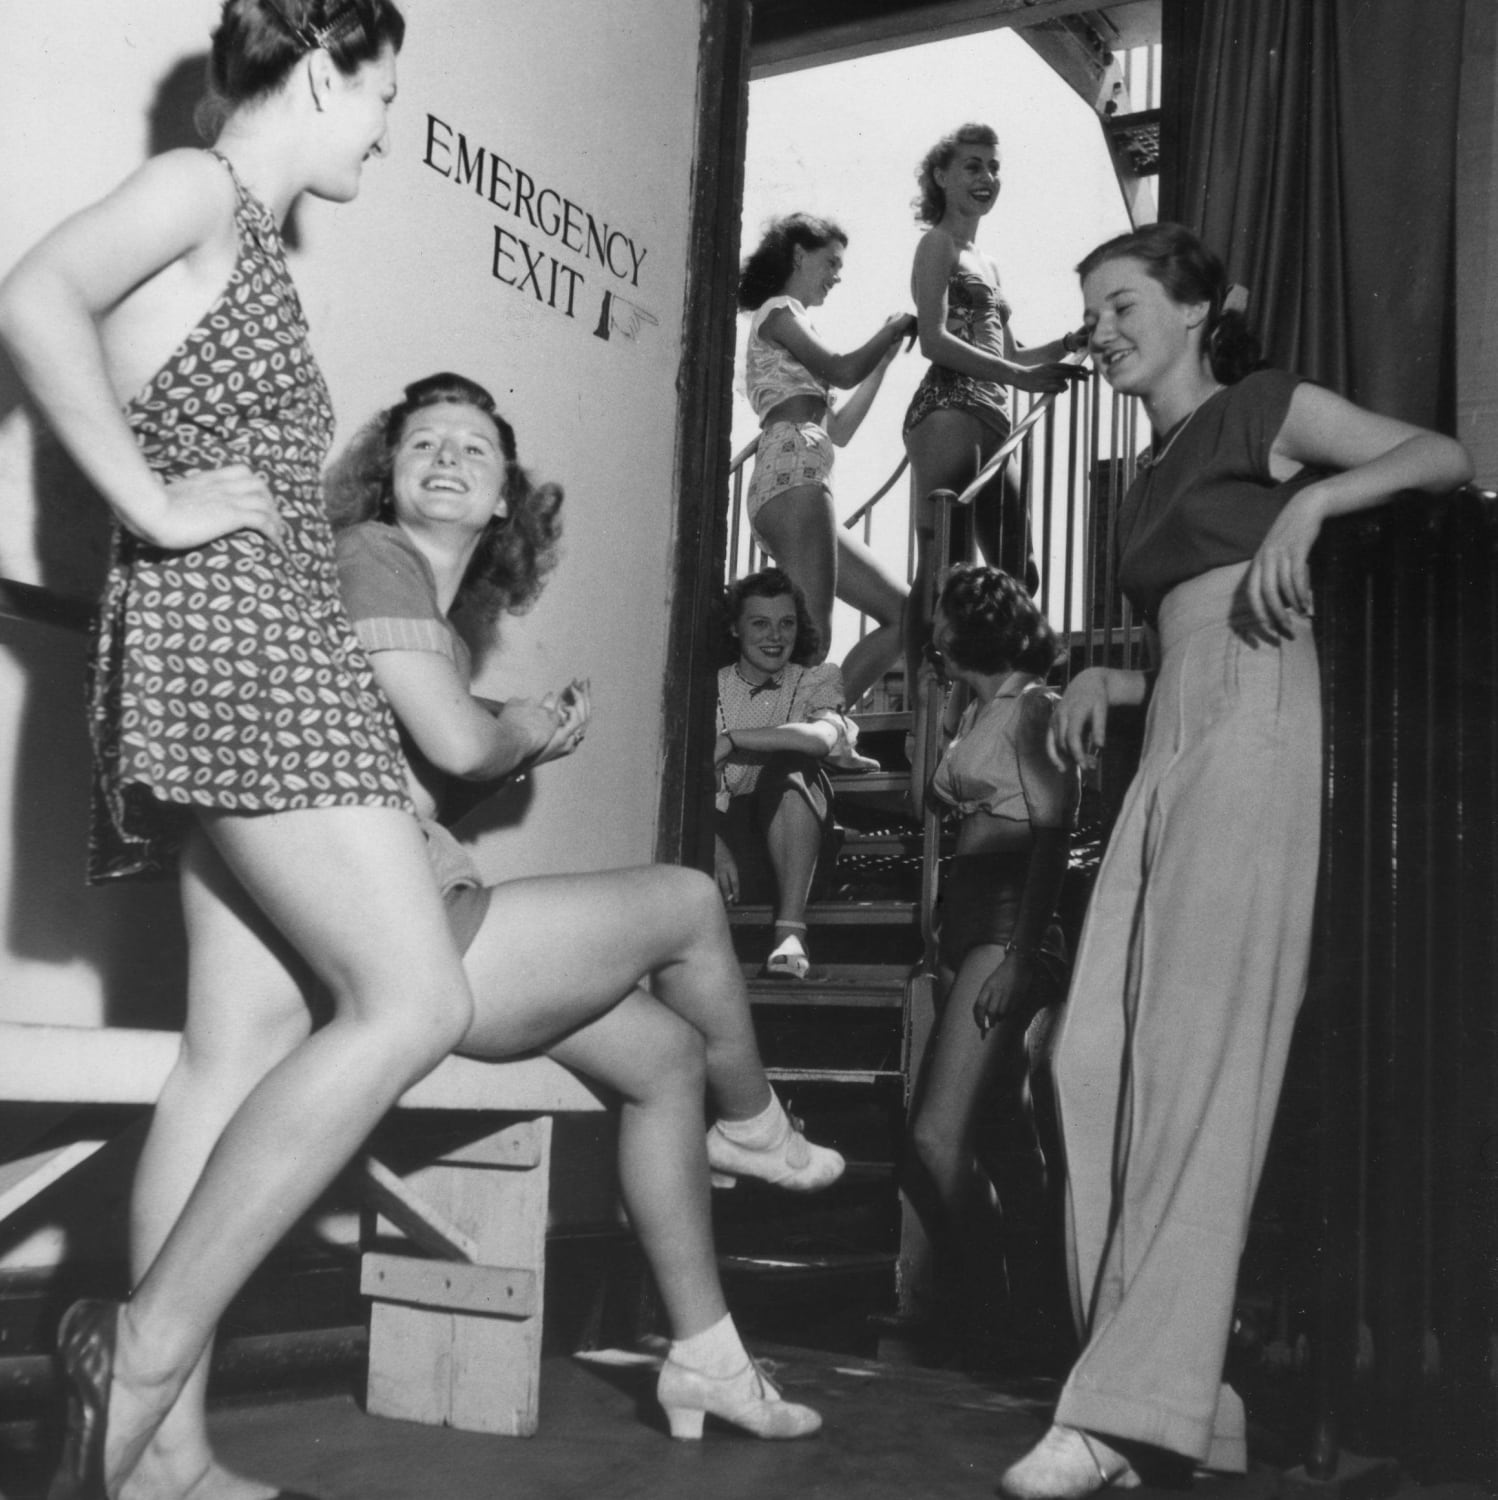 Young women backstage at the Windmill Theatre, the oldest strip club in London. England, 1950.